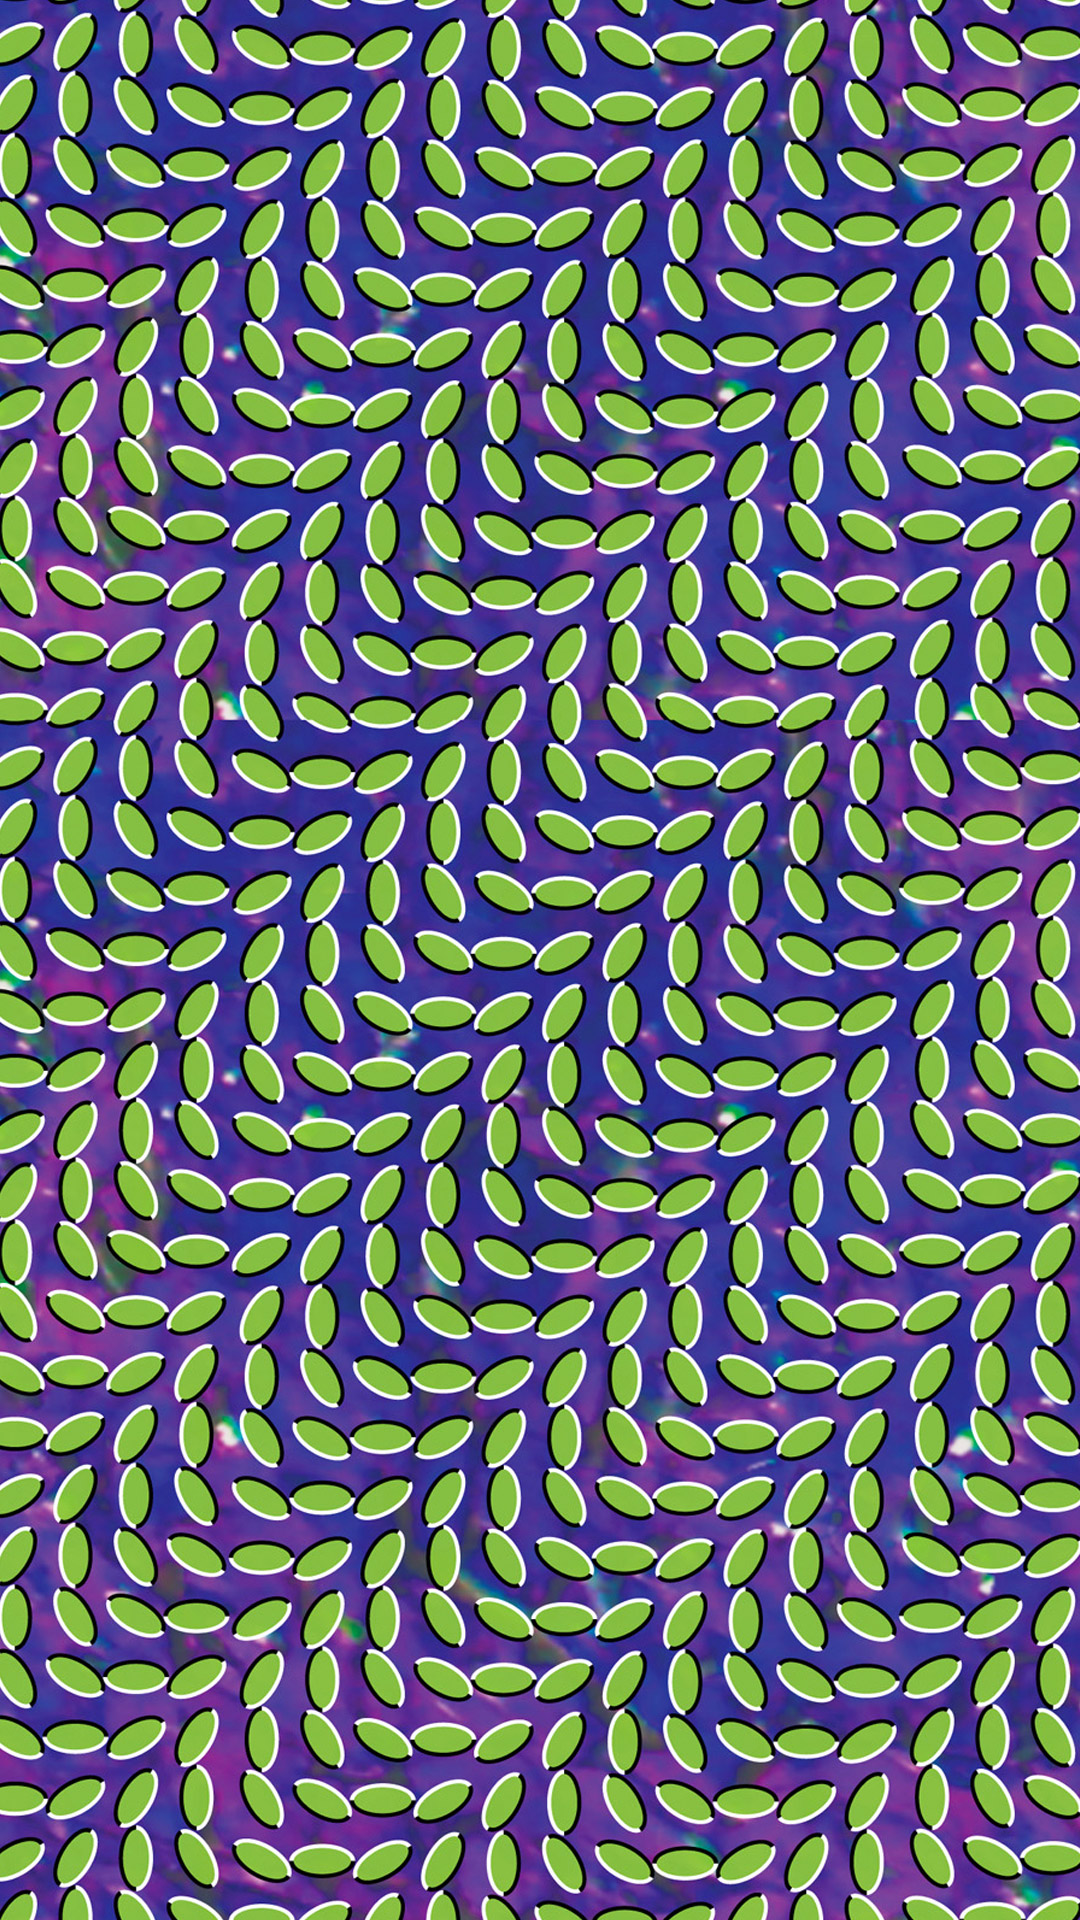 Trippy Optical Illusions That Appear to be Animated (Use as Phone Wallpaper if You Want to go